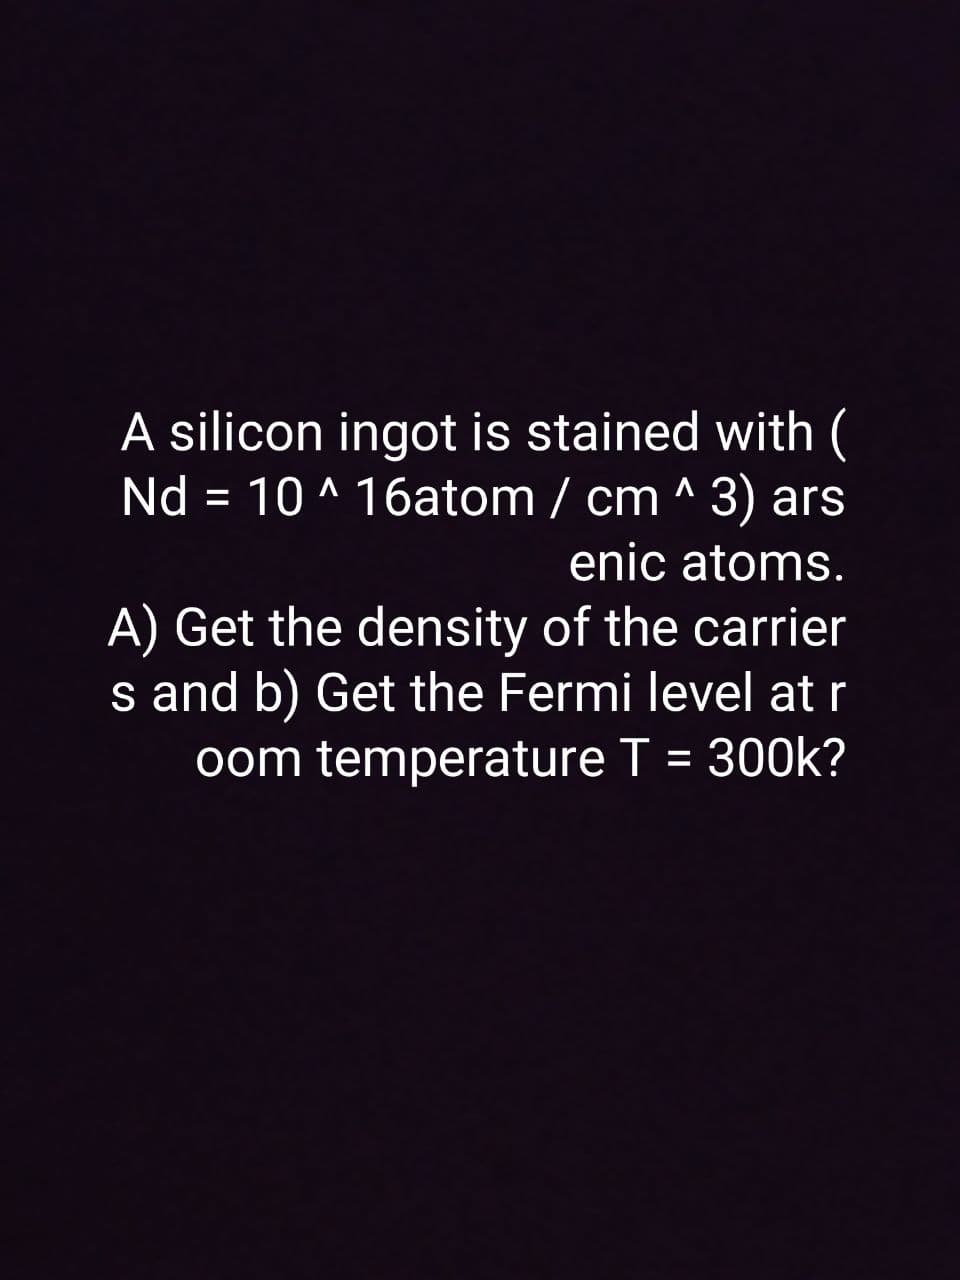 A silicon ingot is stained with (
Nd = 10 ^ 16atom / cm ^ 3) ars
enic atoms.
A) Get the density of the carrier
s and b) Get the Fermi level at r
oom temperature T = 300k?
